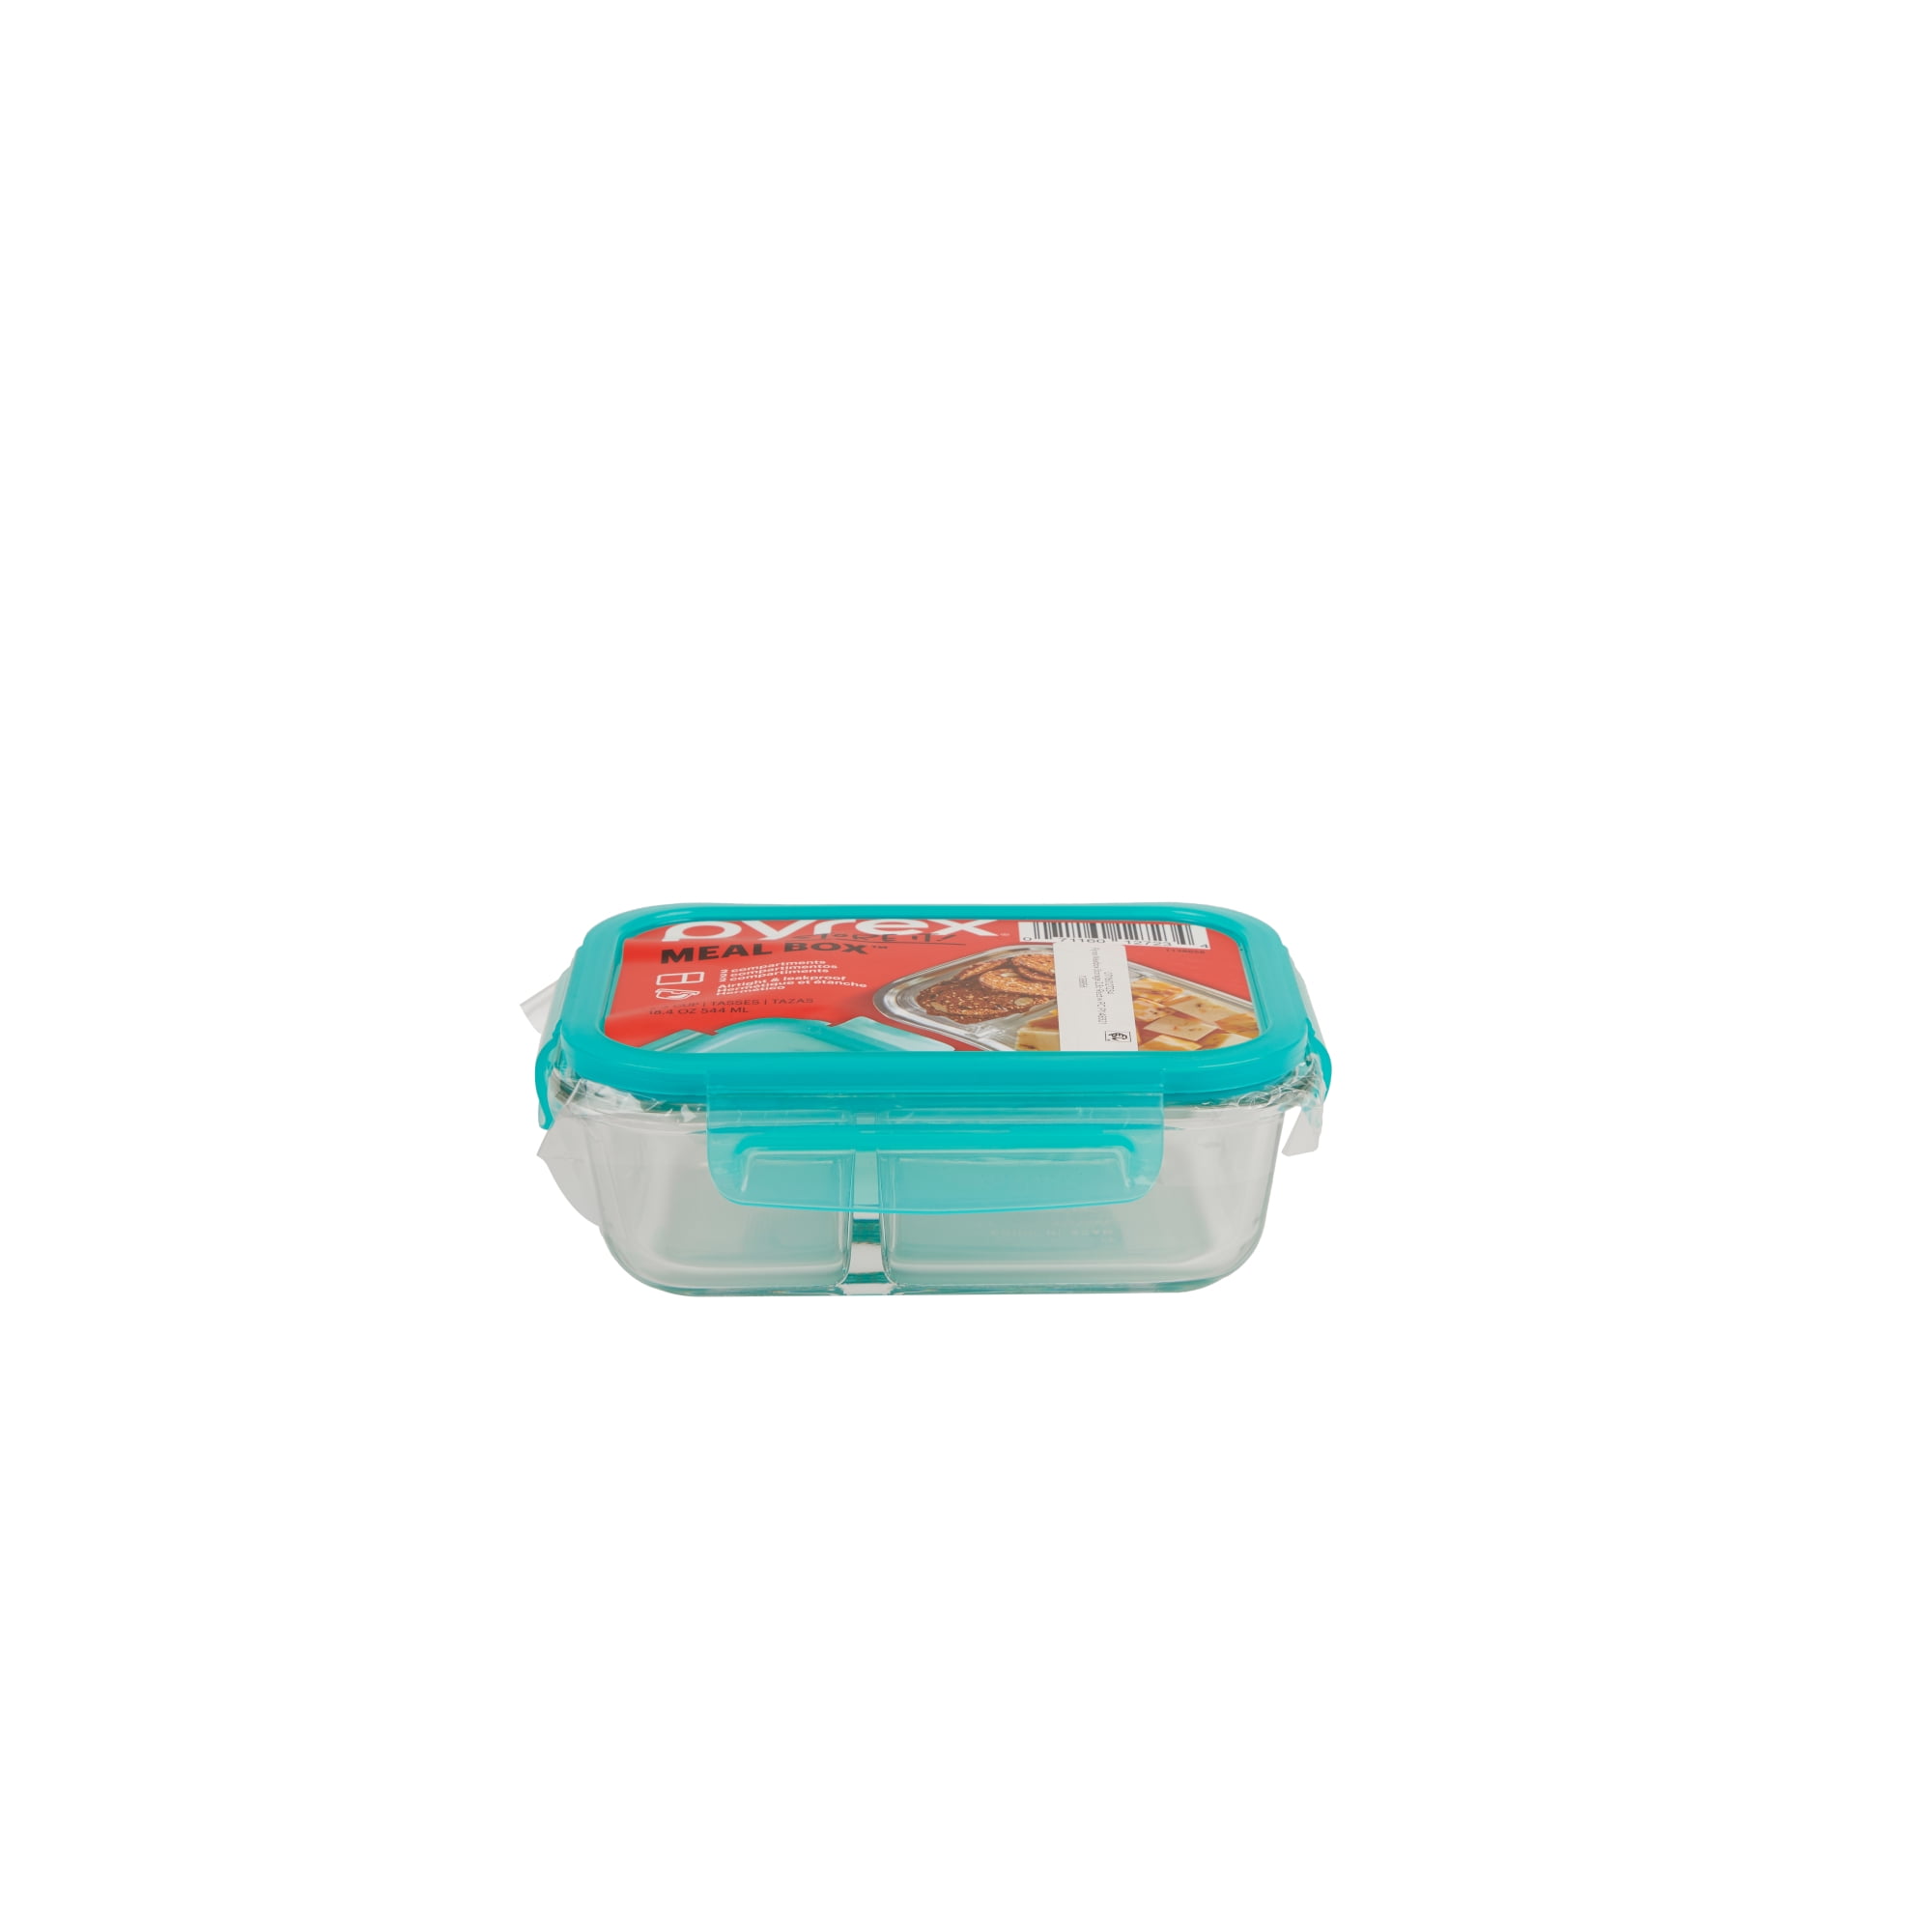 Pyrex MealBox Glass Food Storage Container, 2 Compartments, 3.4